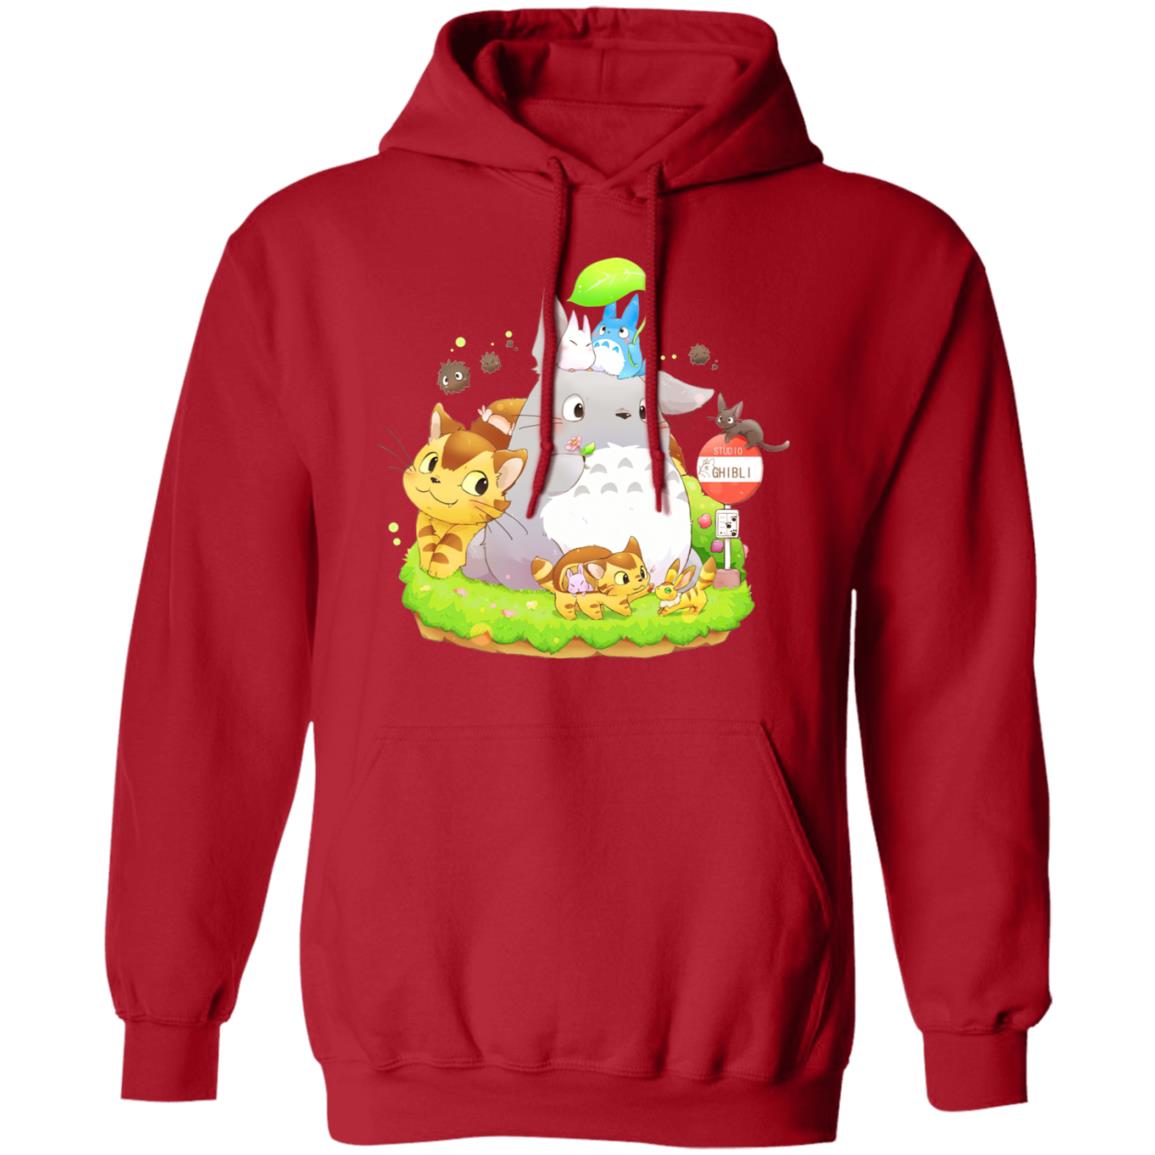 Totoro Family and The Cat Bus Hoodie